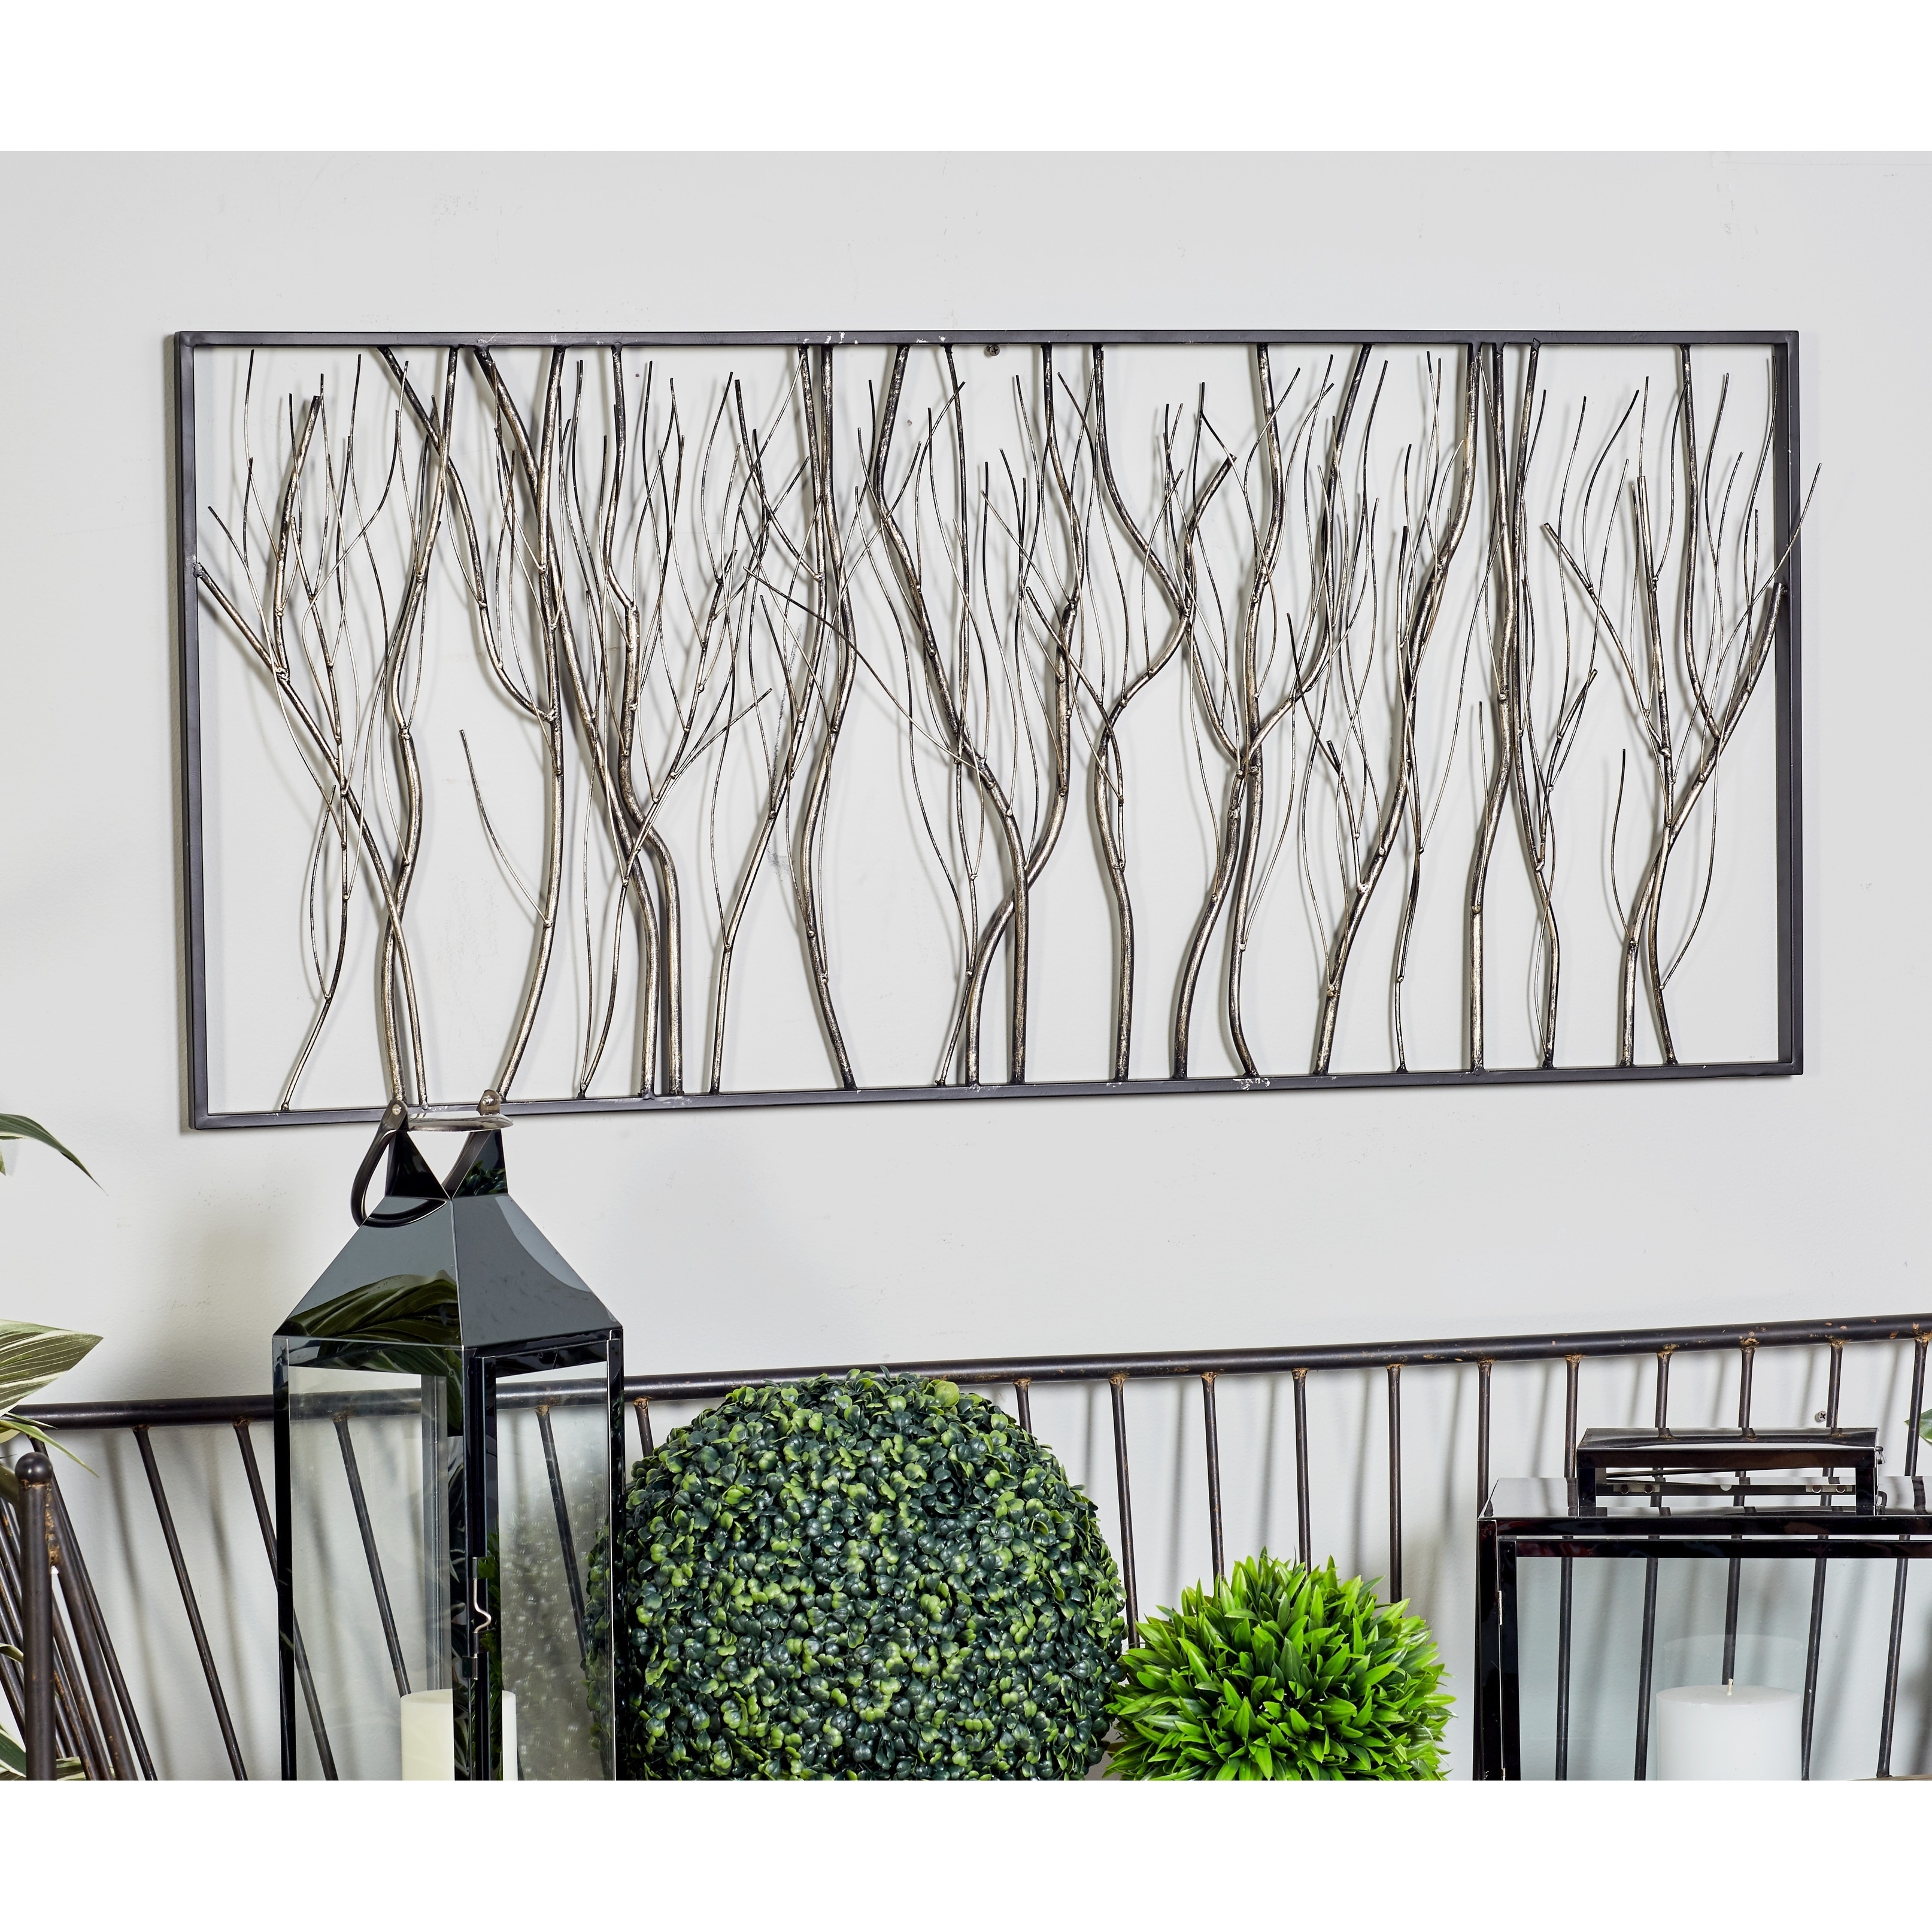 Shop Natural 22 x 48 Inch Iron Twigs and Branches Wall Decor by Studio